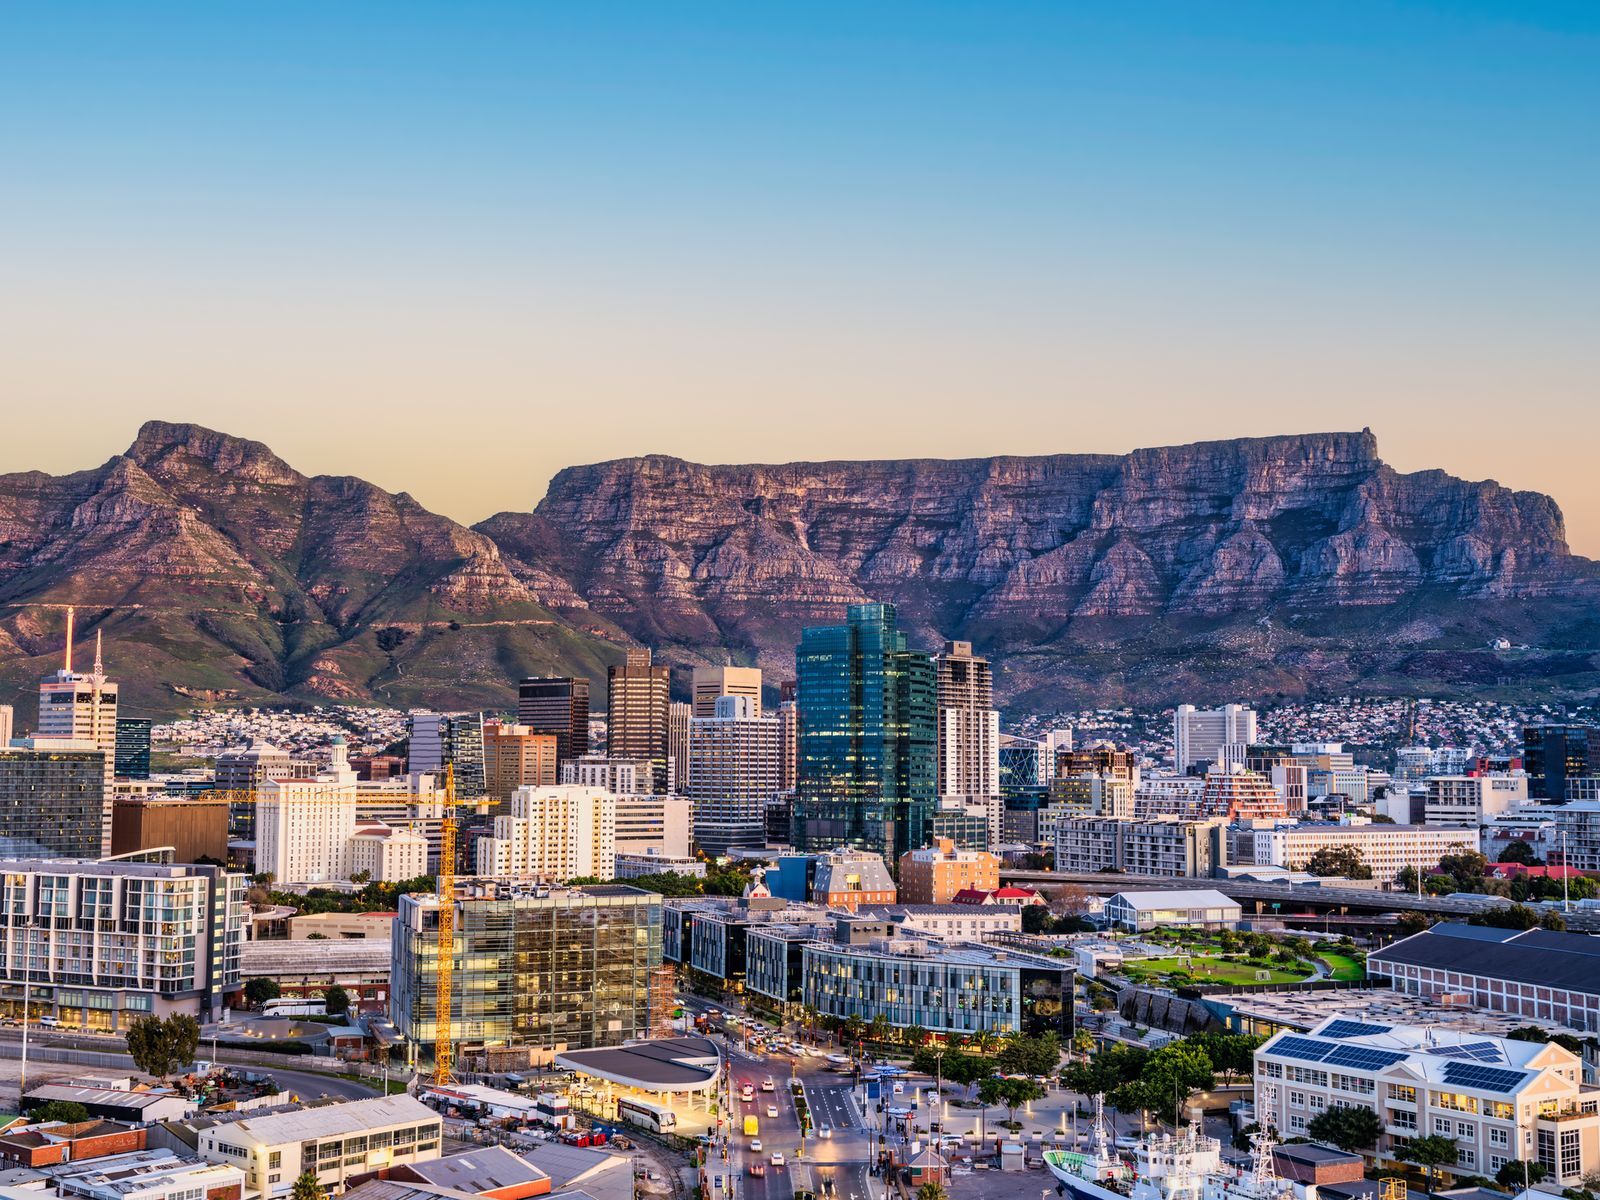 <p>While Cape Town, South Africa is a popular tourist destination, known for its stunning landscapes and cultural experiences, it is also a place that travellers may want to avoid in 2024. Tourists will want to <a href="https://www.remoteyear.com/blog/is-cape-town-safe">exercise caution</a> while in Cape Town, as gang-related activity is common and rallies and protests occur frequently. Instead, head to <a href="https://www.thetravel.com/what-is-durban-south-africa-known-for/">Durban</a> with its sunny beaches, rich history, and outdoor adventure. </p>